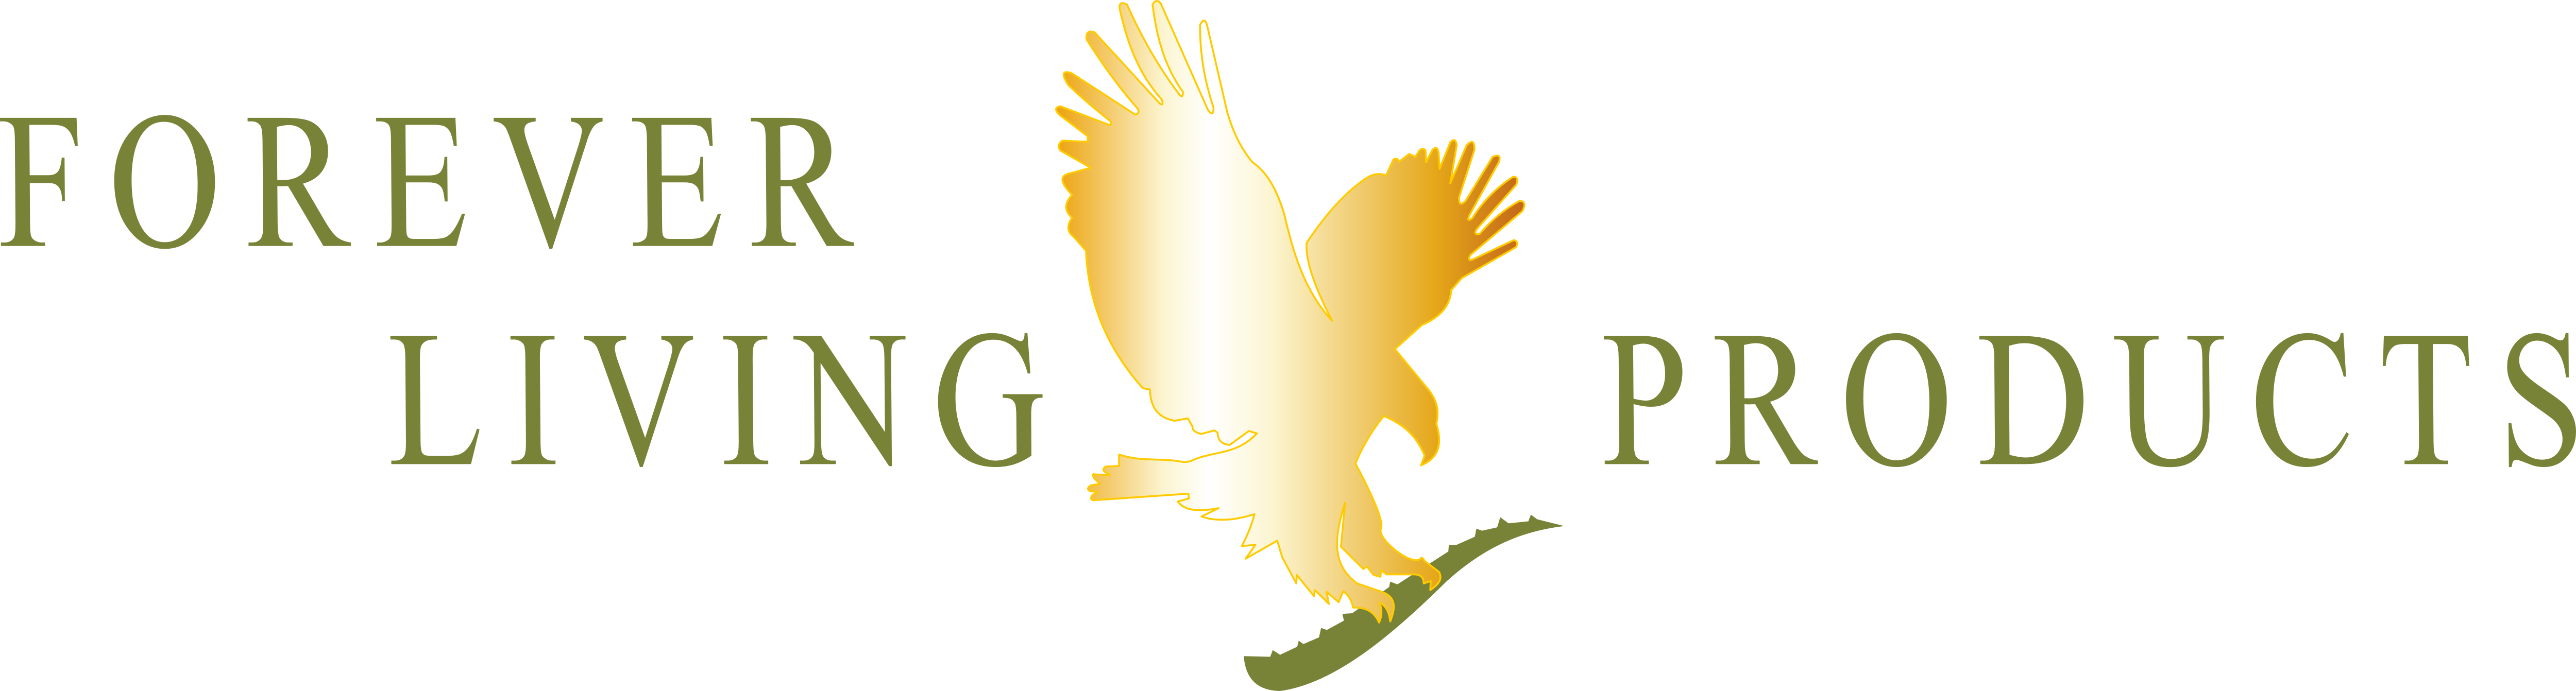 Forever Living Products Company Logo - Wallpaper Images Android PC HD